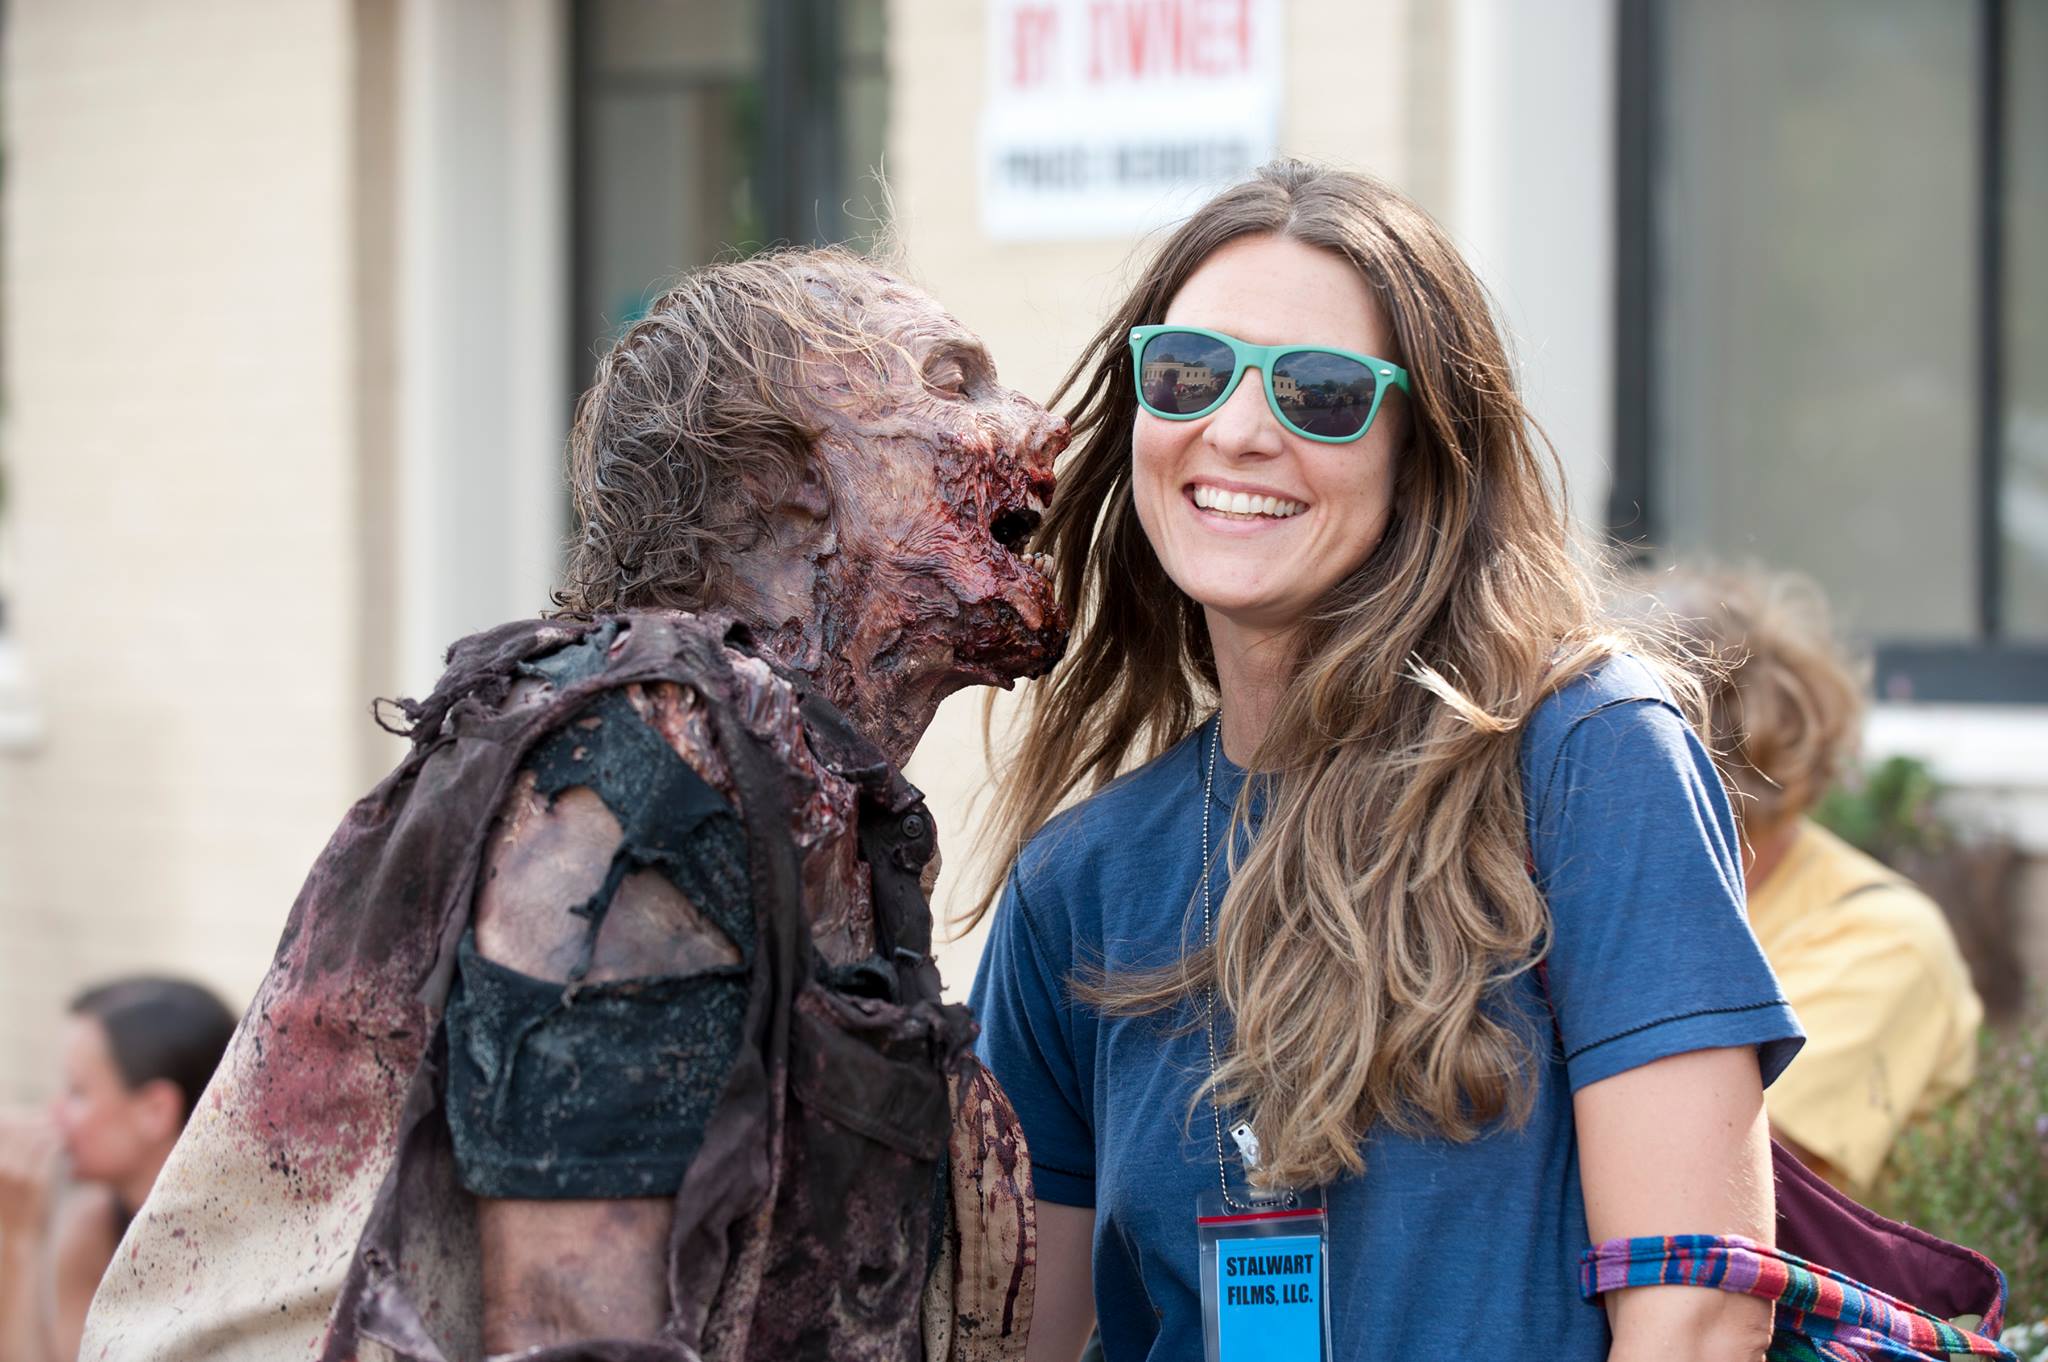 Nichole Beattie: 5 quick facts about The Walking Dead writer